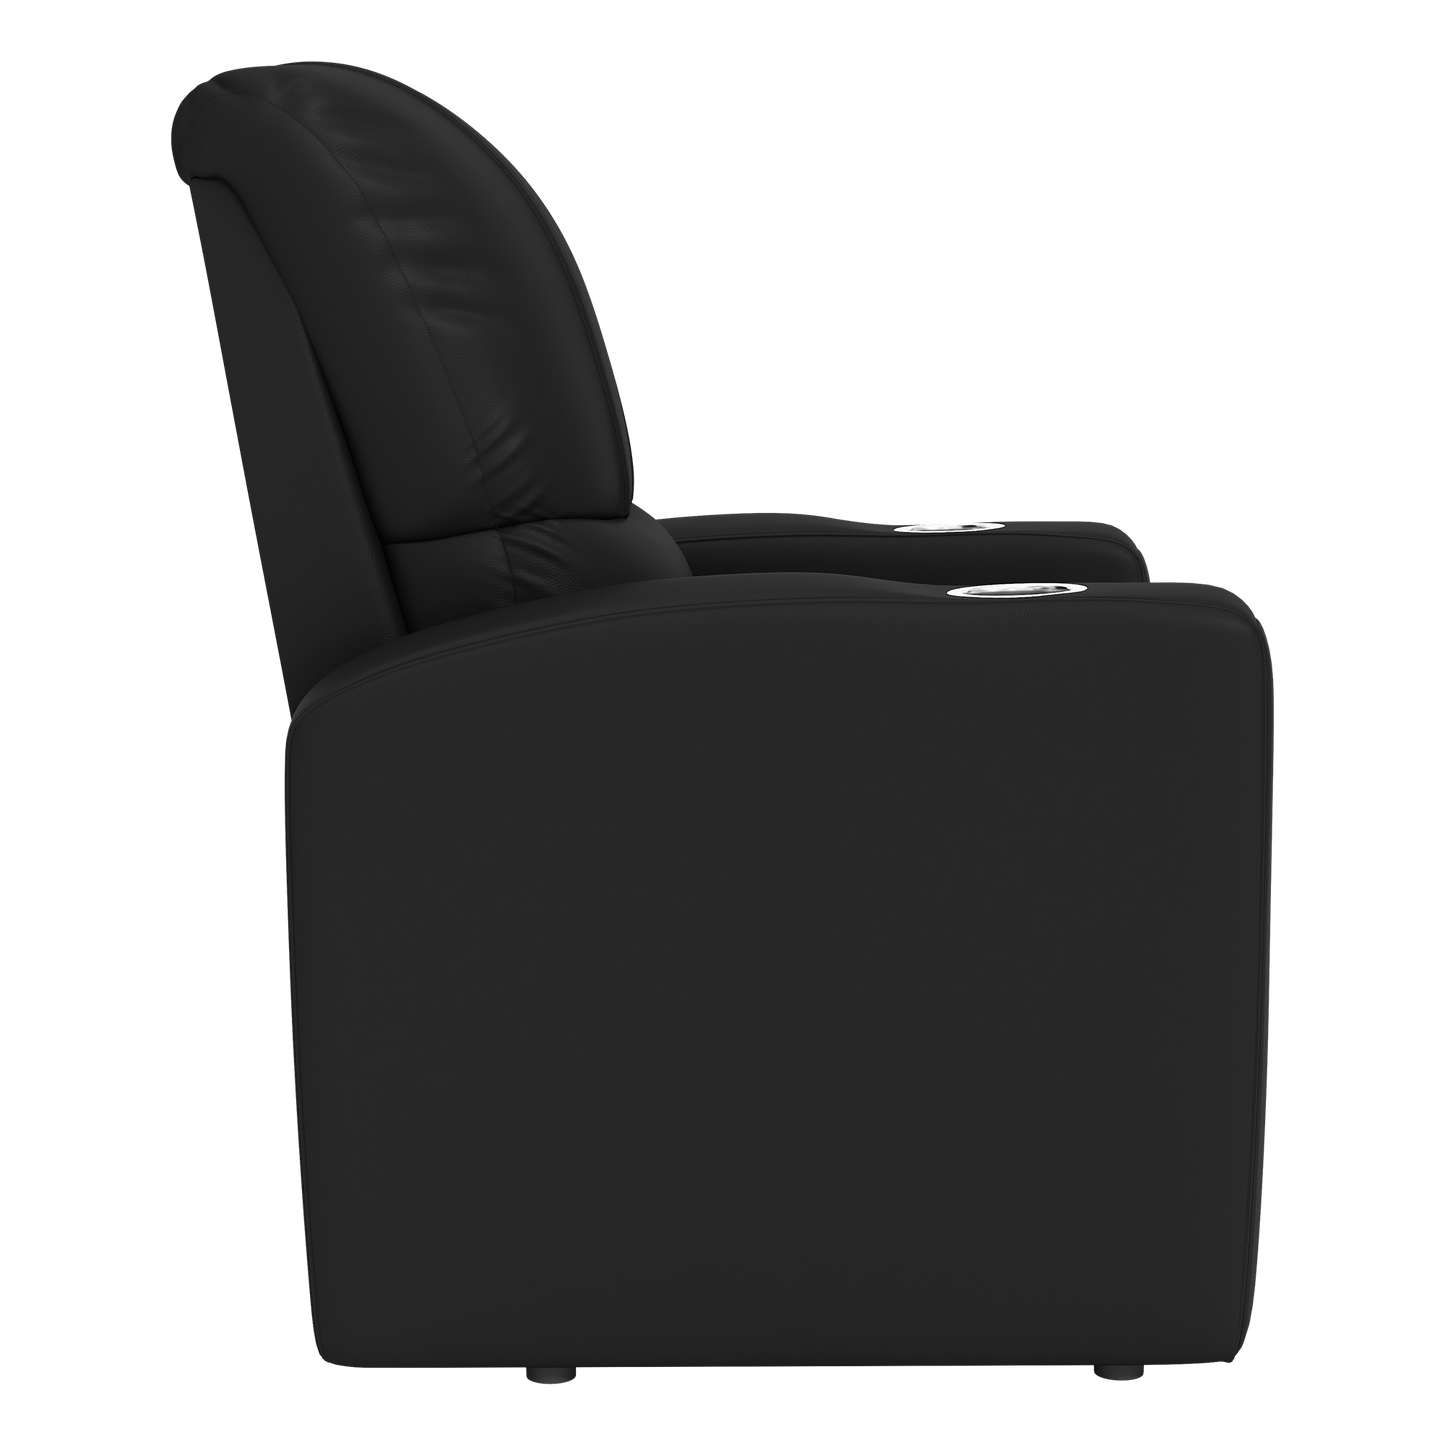 Stealth Recliner with  Kansas City Chiefs Primary Logo